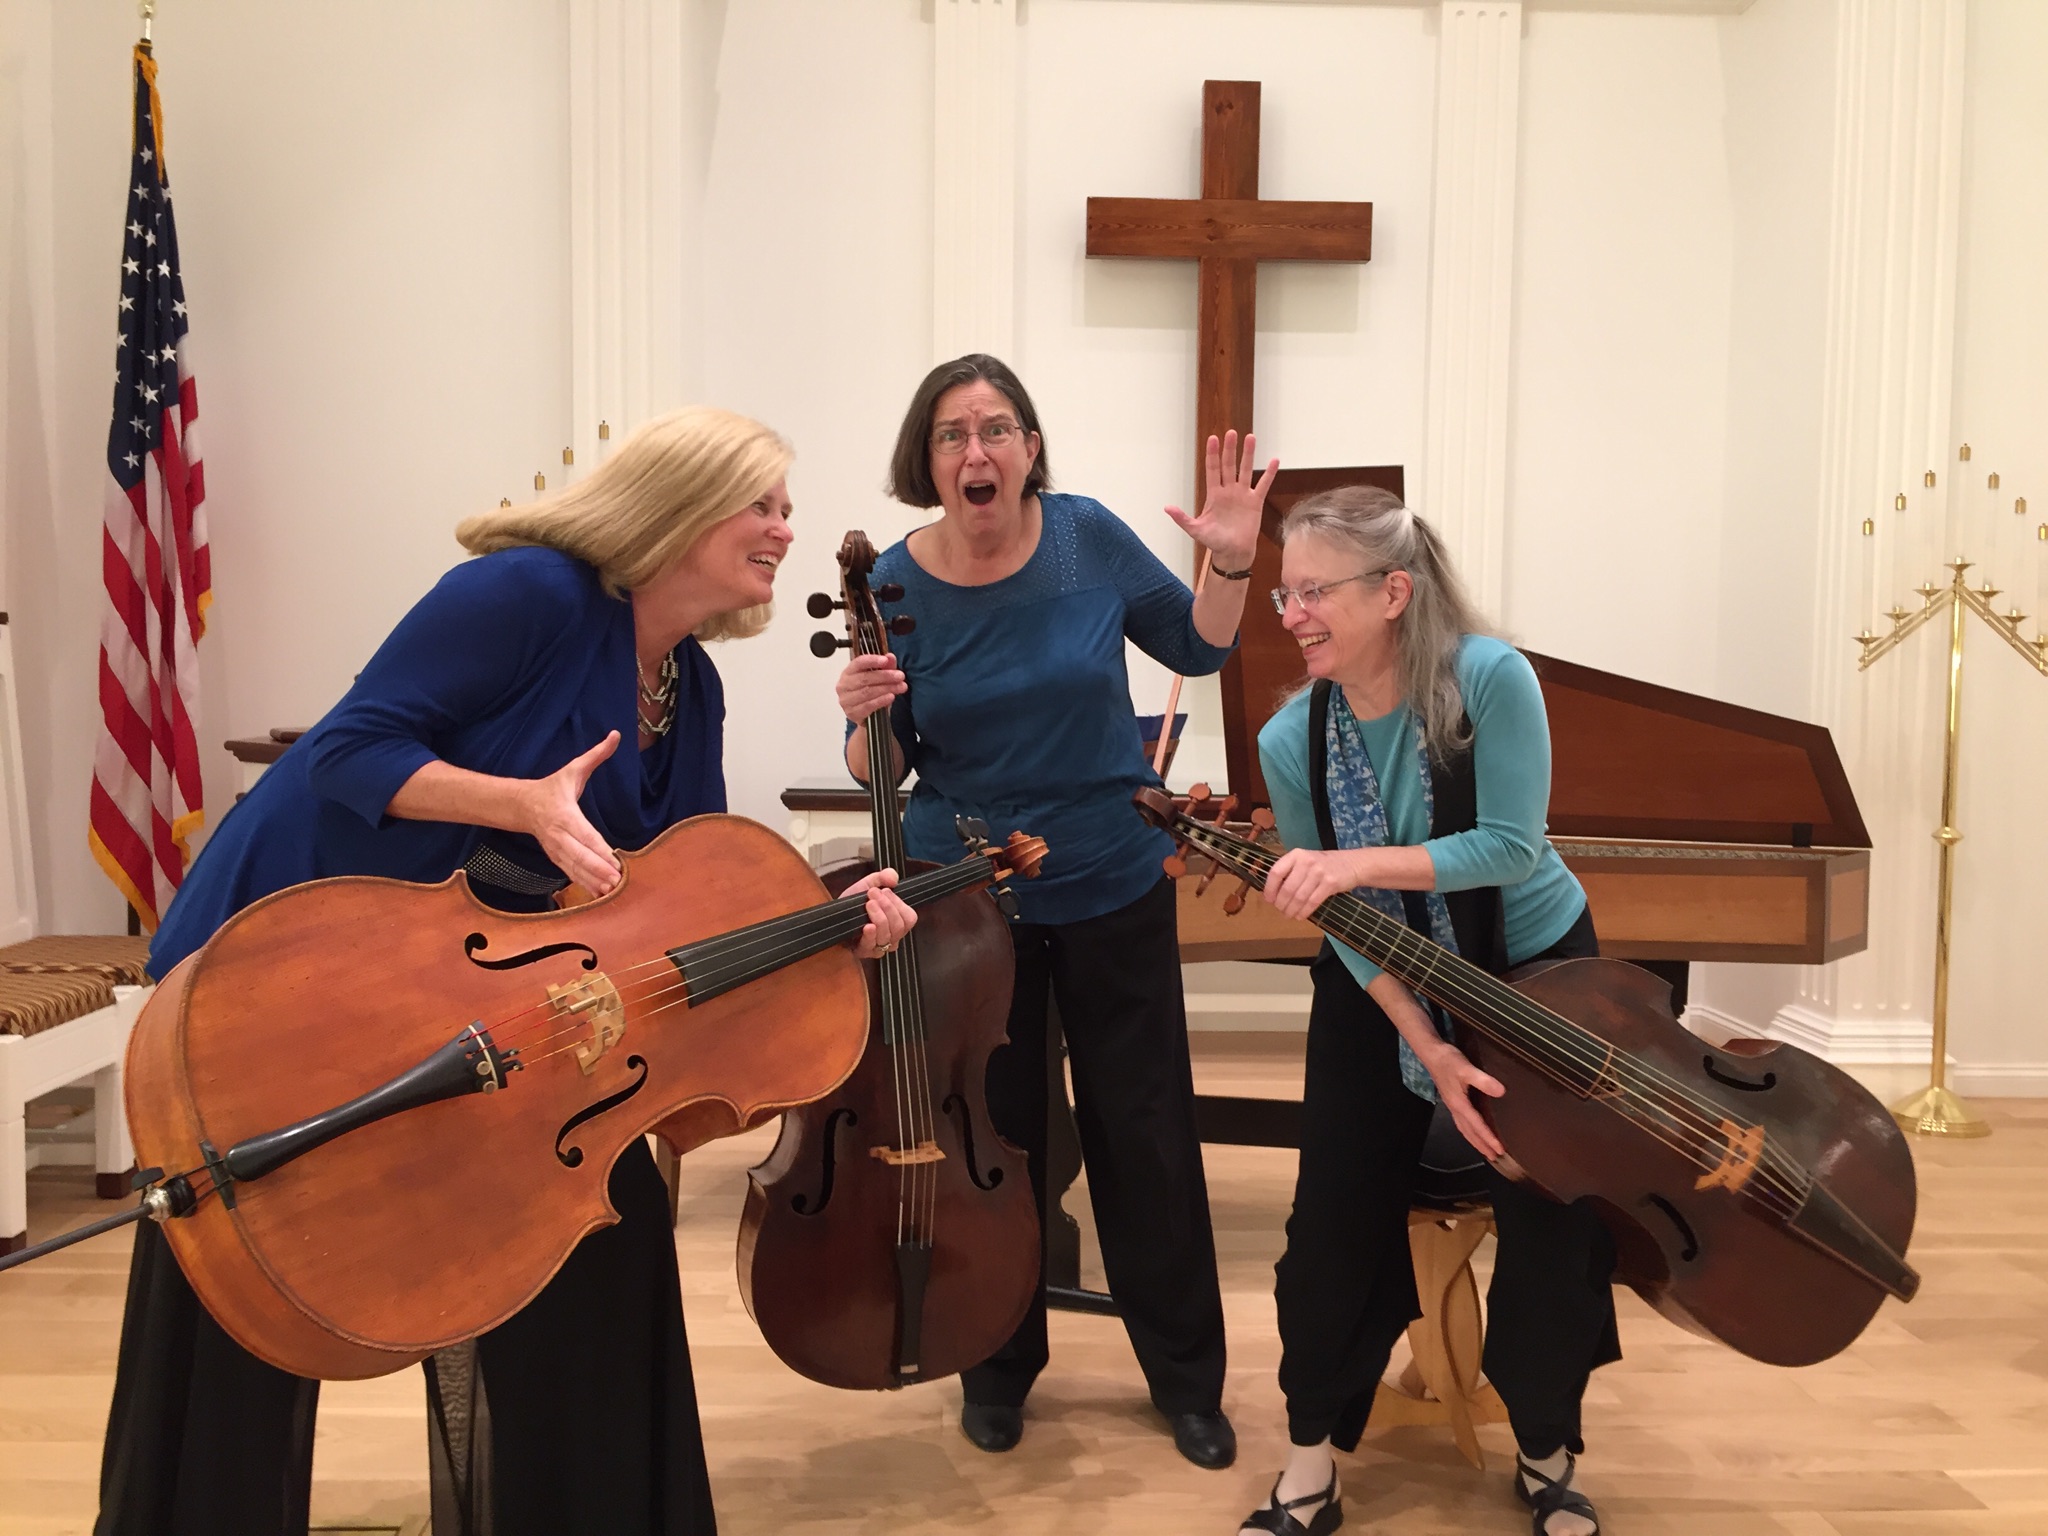 Dueling Cellos & Gamba Concert in Somers CT